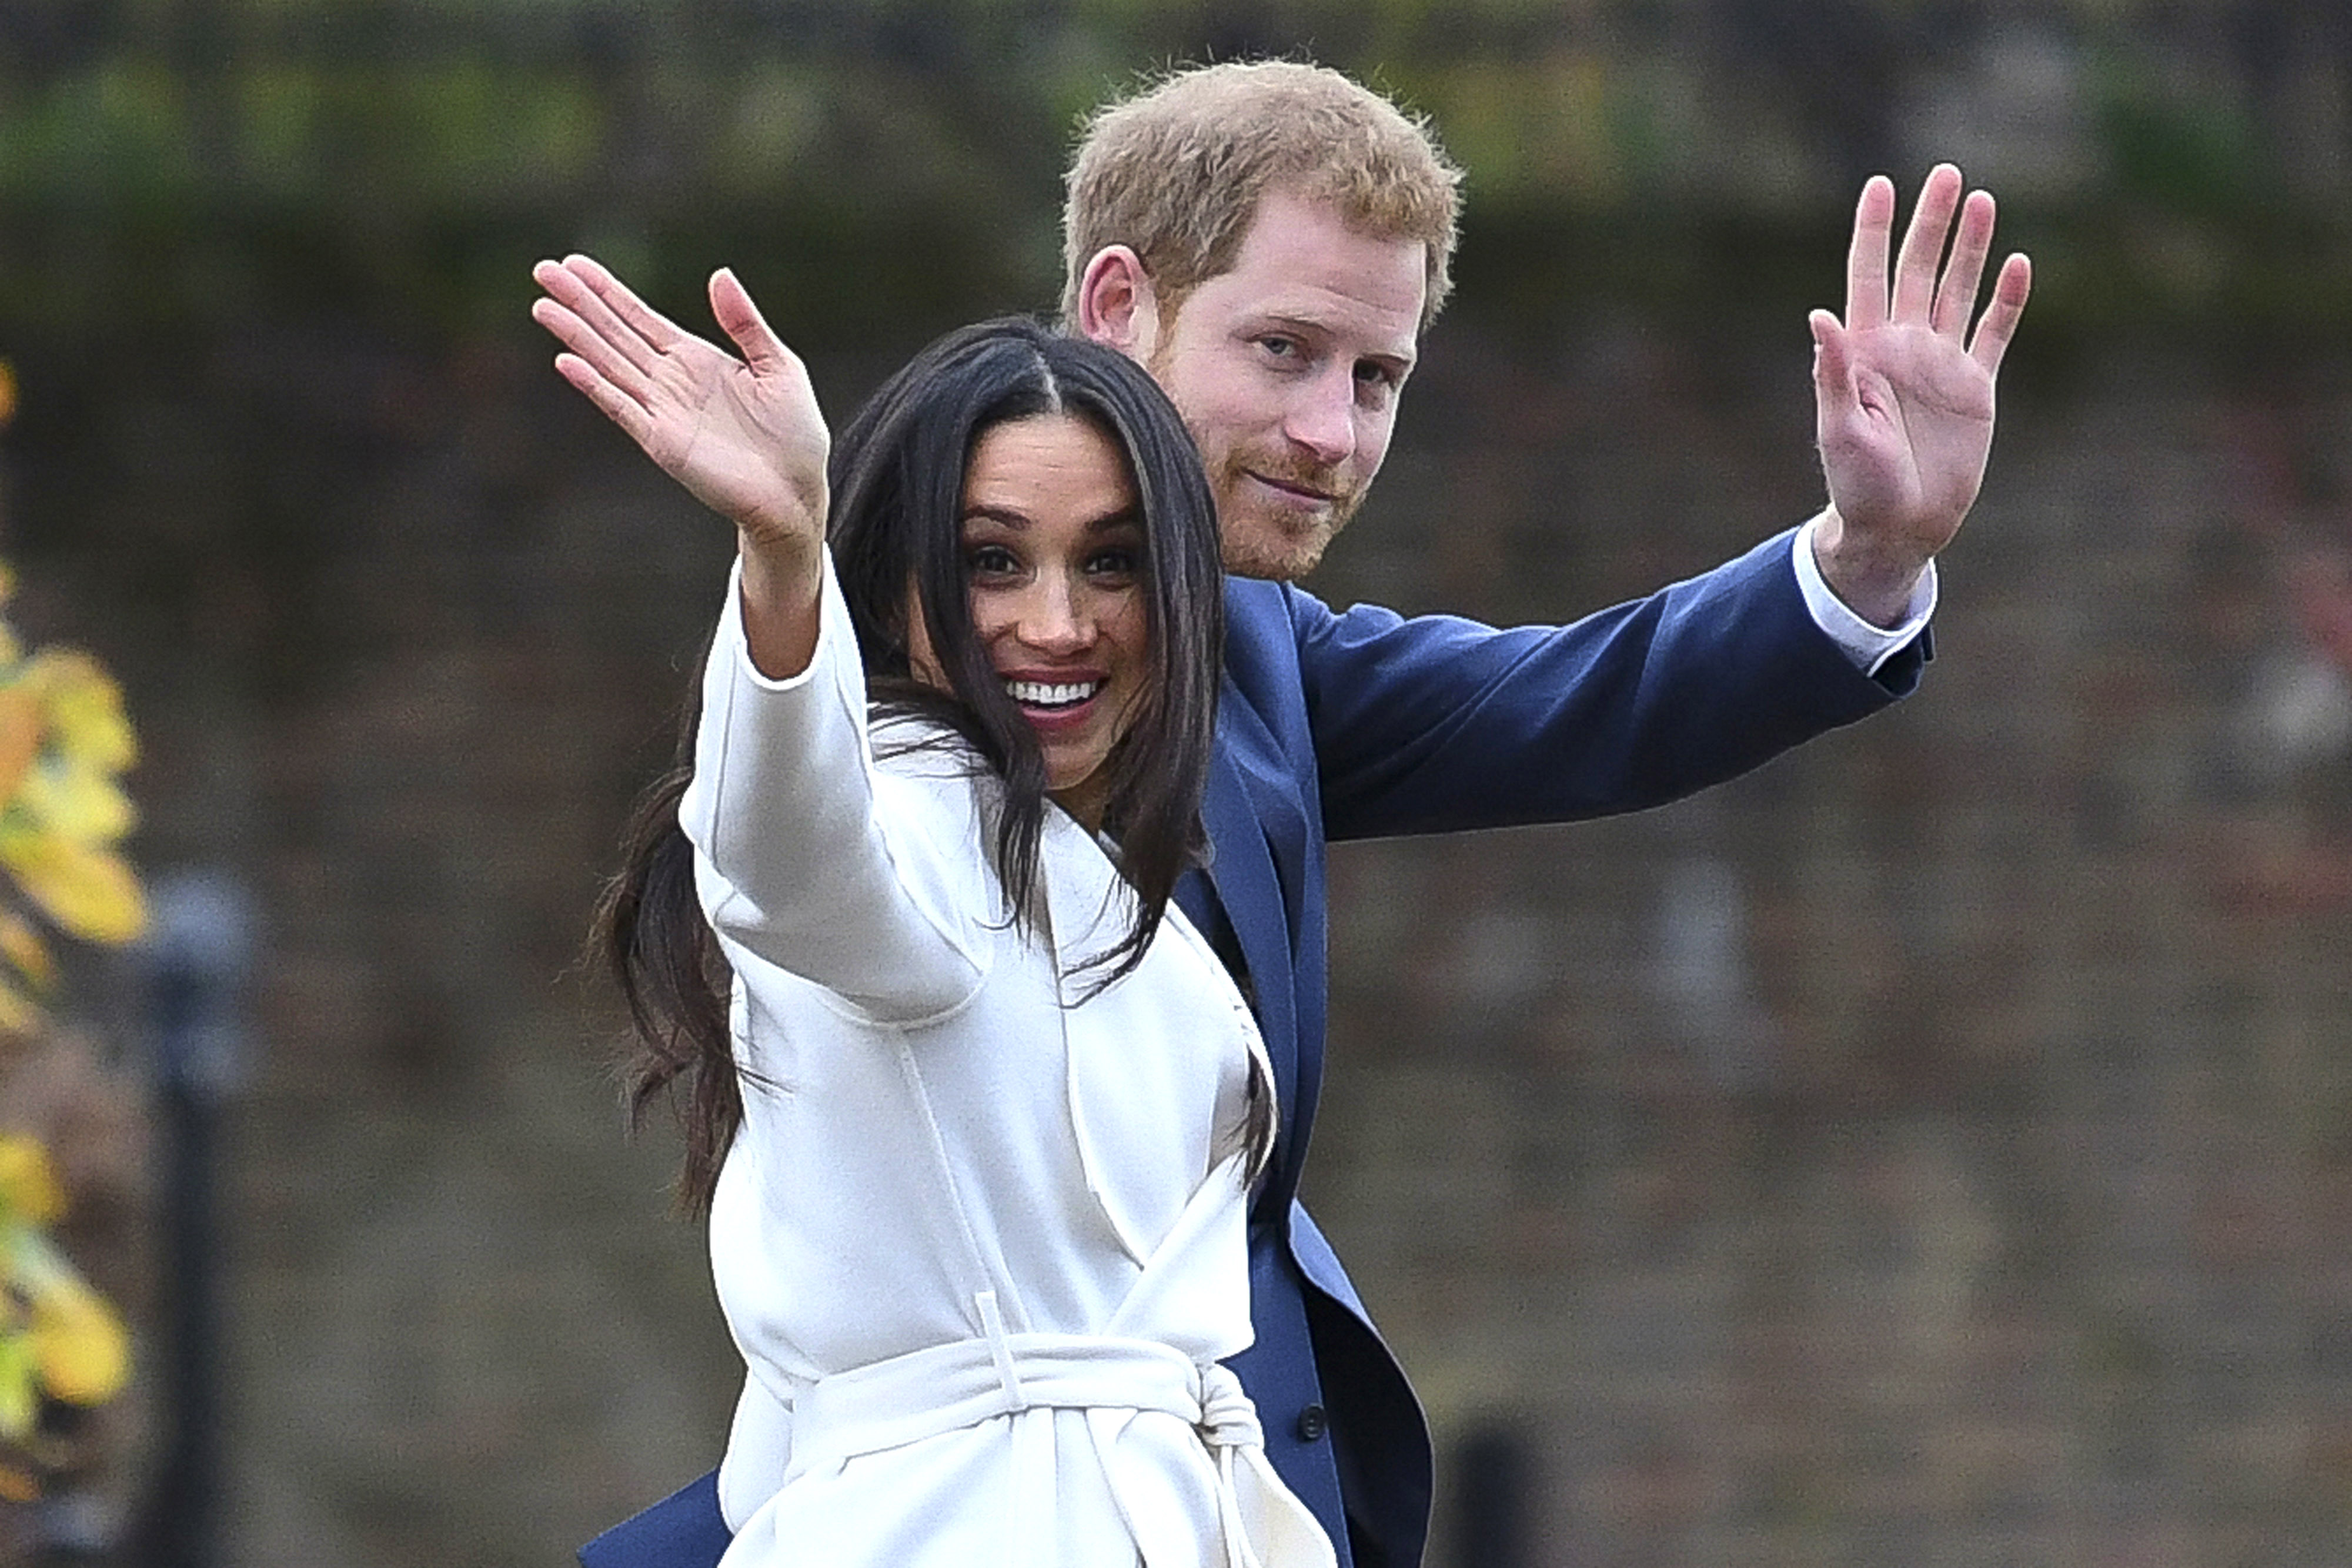  Prince Harry and Meghan Markle wave at their official photocall to announce their engagement